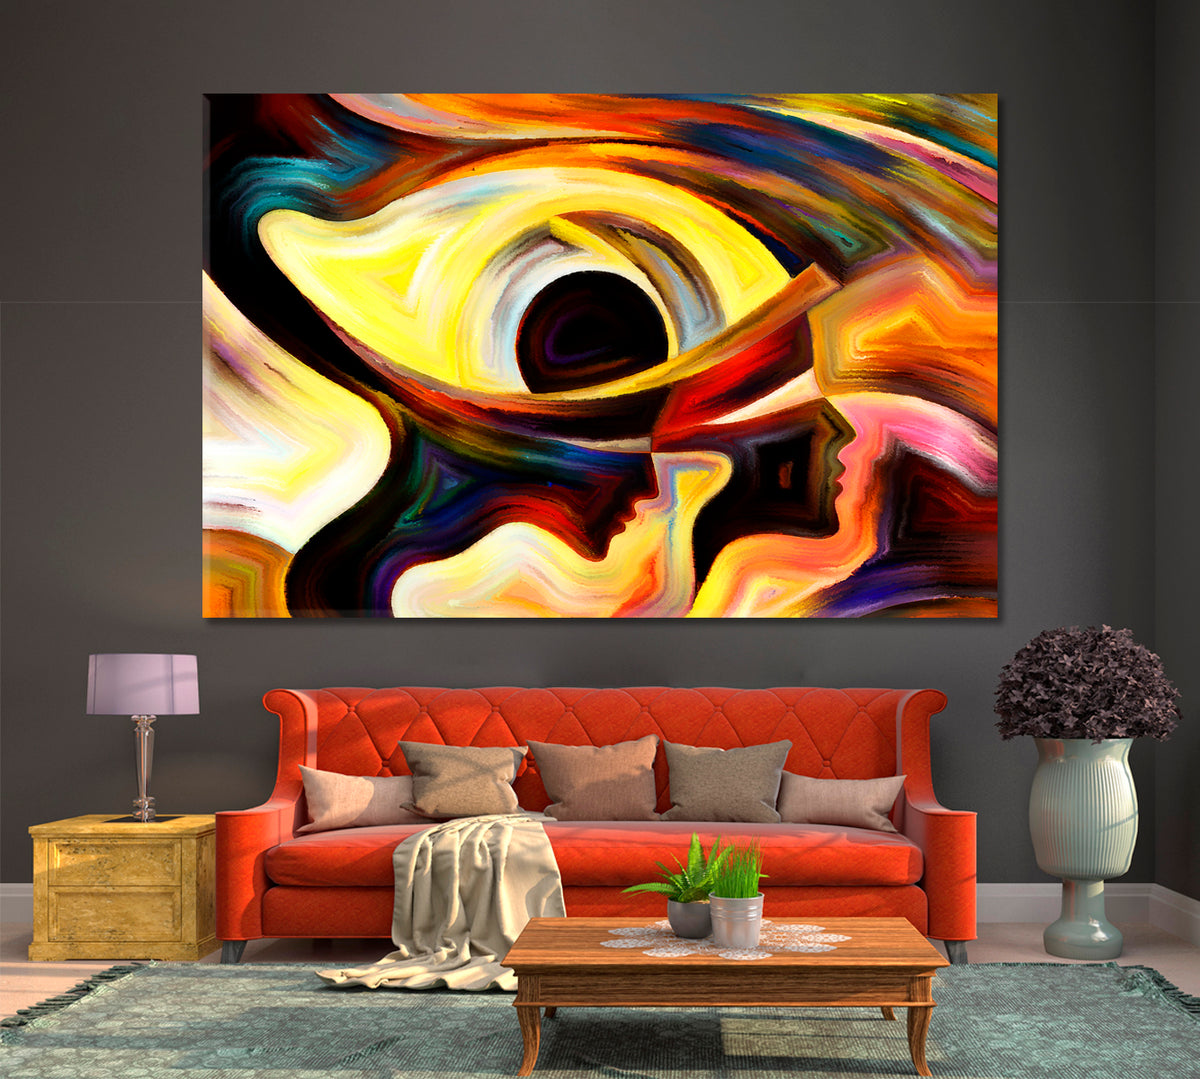 Precognition Abstract Allegory Human Profile and Eye Consciousness Art Artesty 1 panel 24" x 16" 